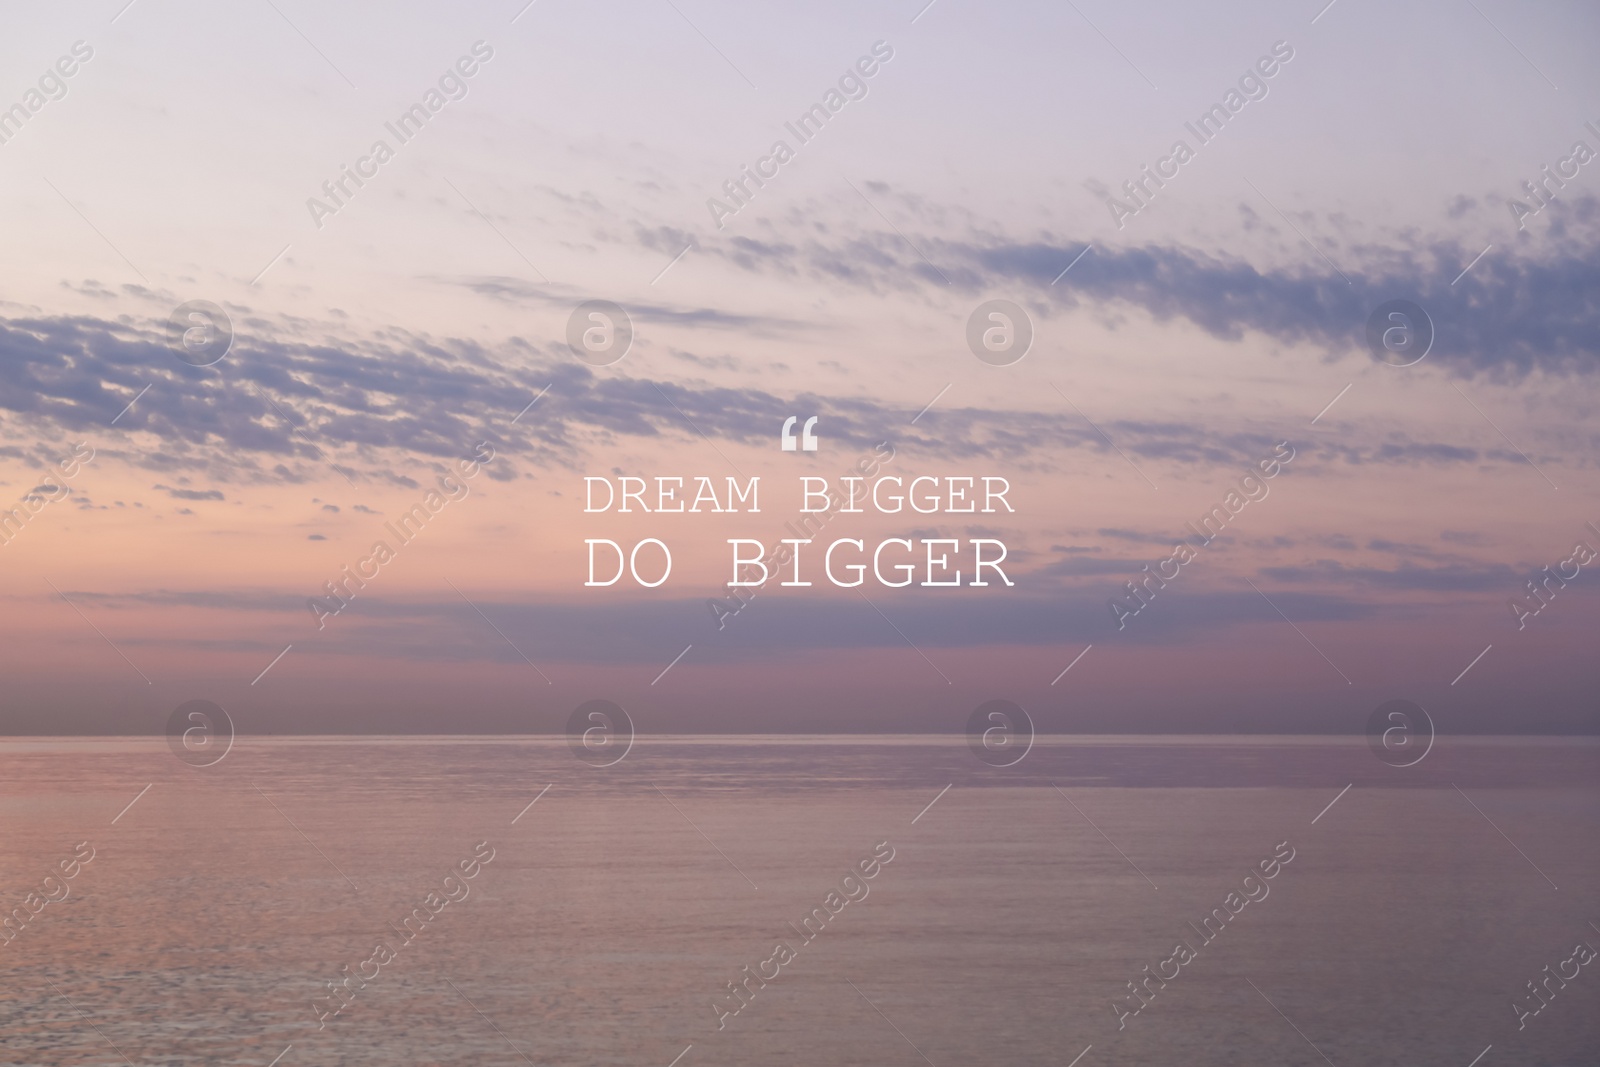 Image of Dream Bigger Do Bigger. Inspirational quote motivating to set life goals freely and forget about reasons that can hold back. Text against seascape in morning